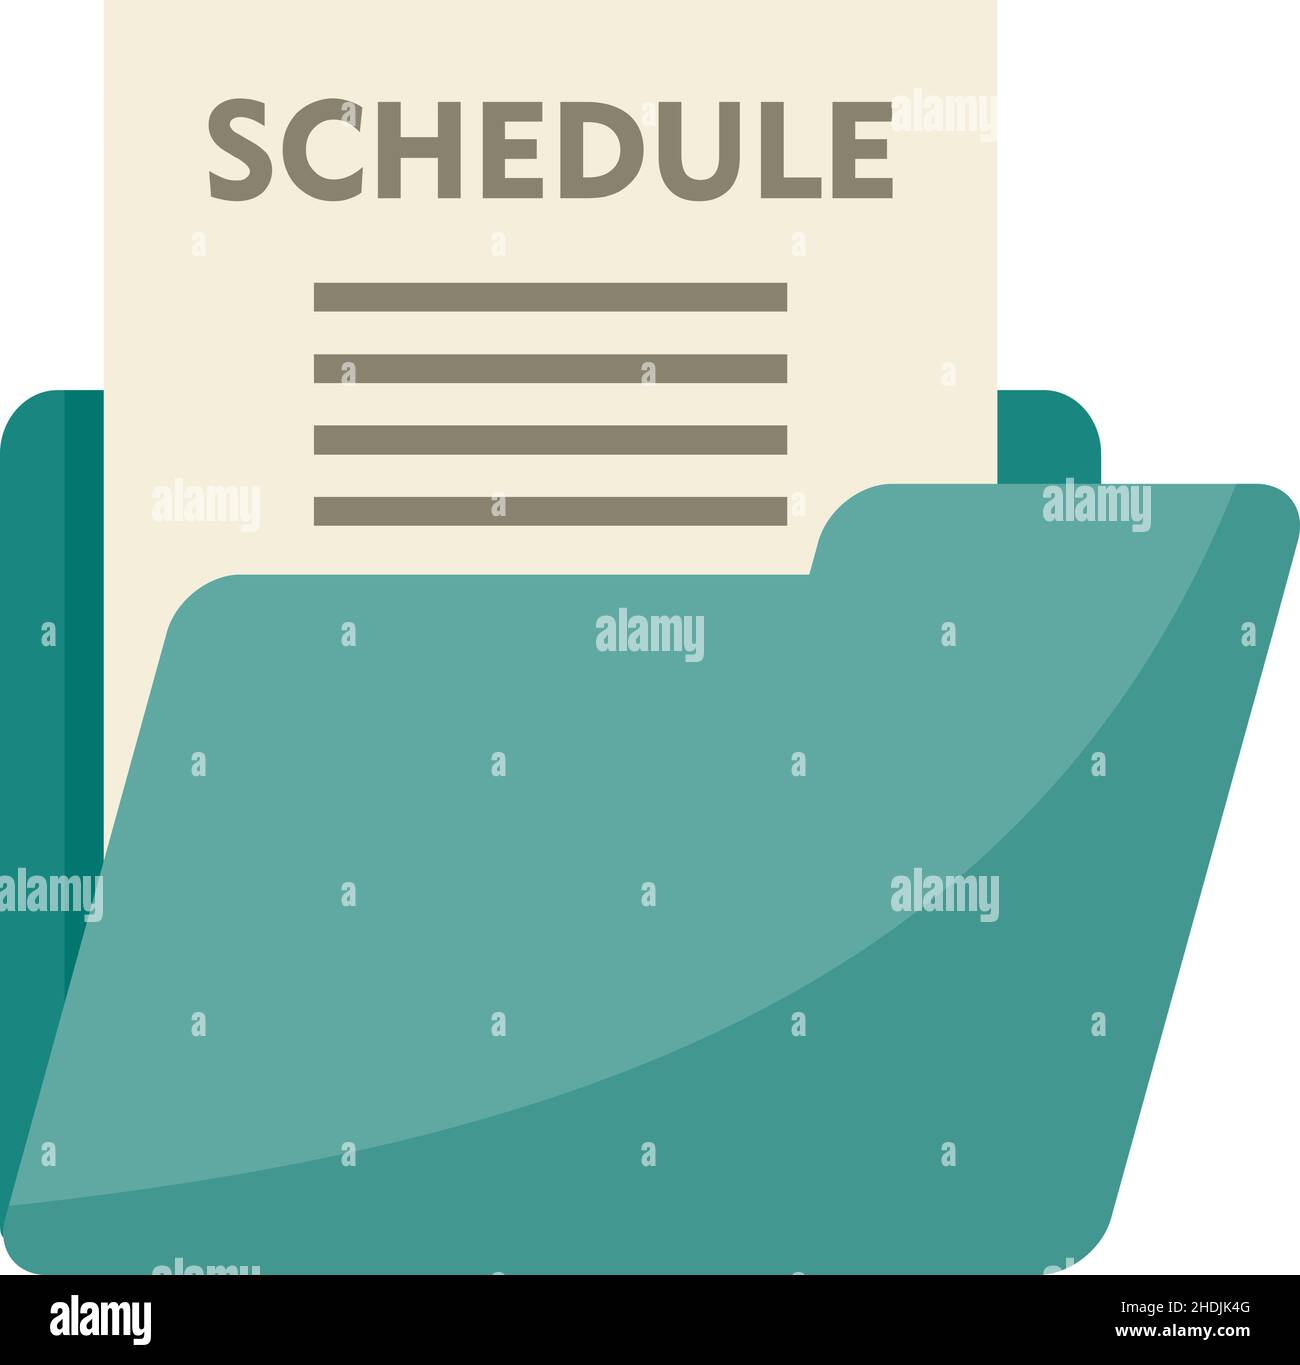 Syllabus schedule icon. Flat illustration of Syllabus schedule vector icon isolated on white background Stock Vector